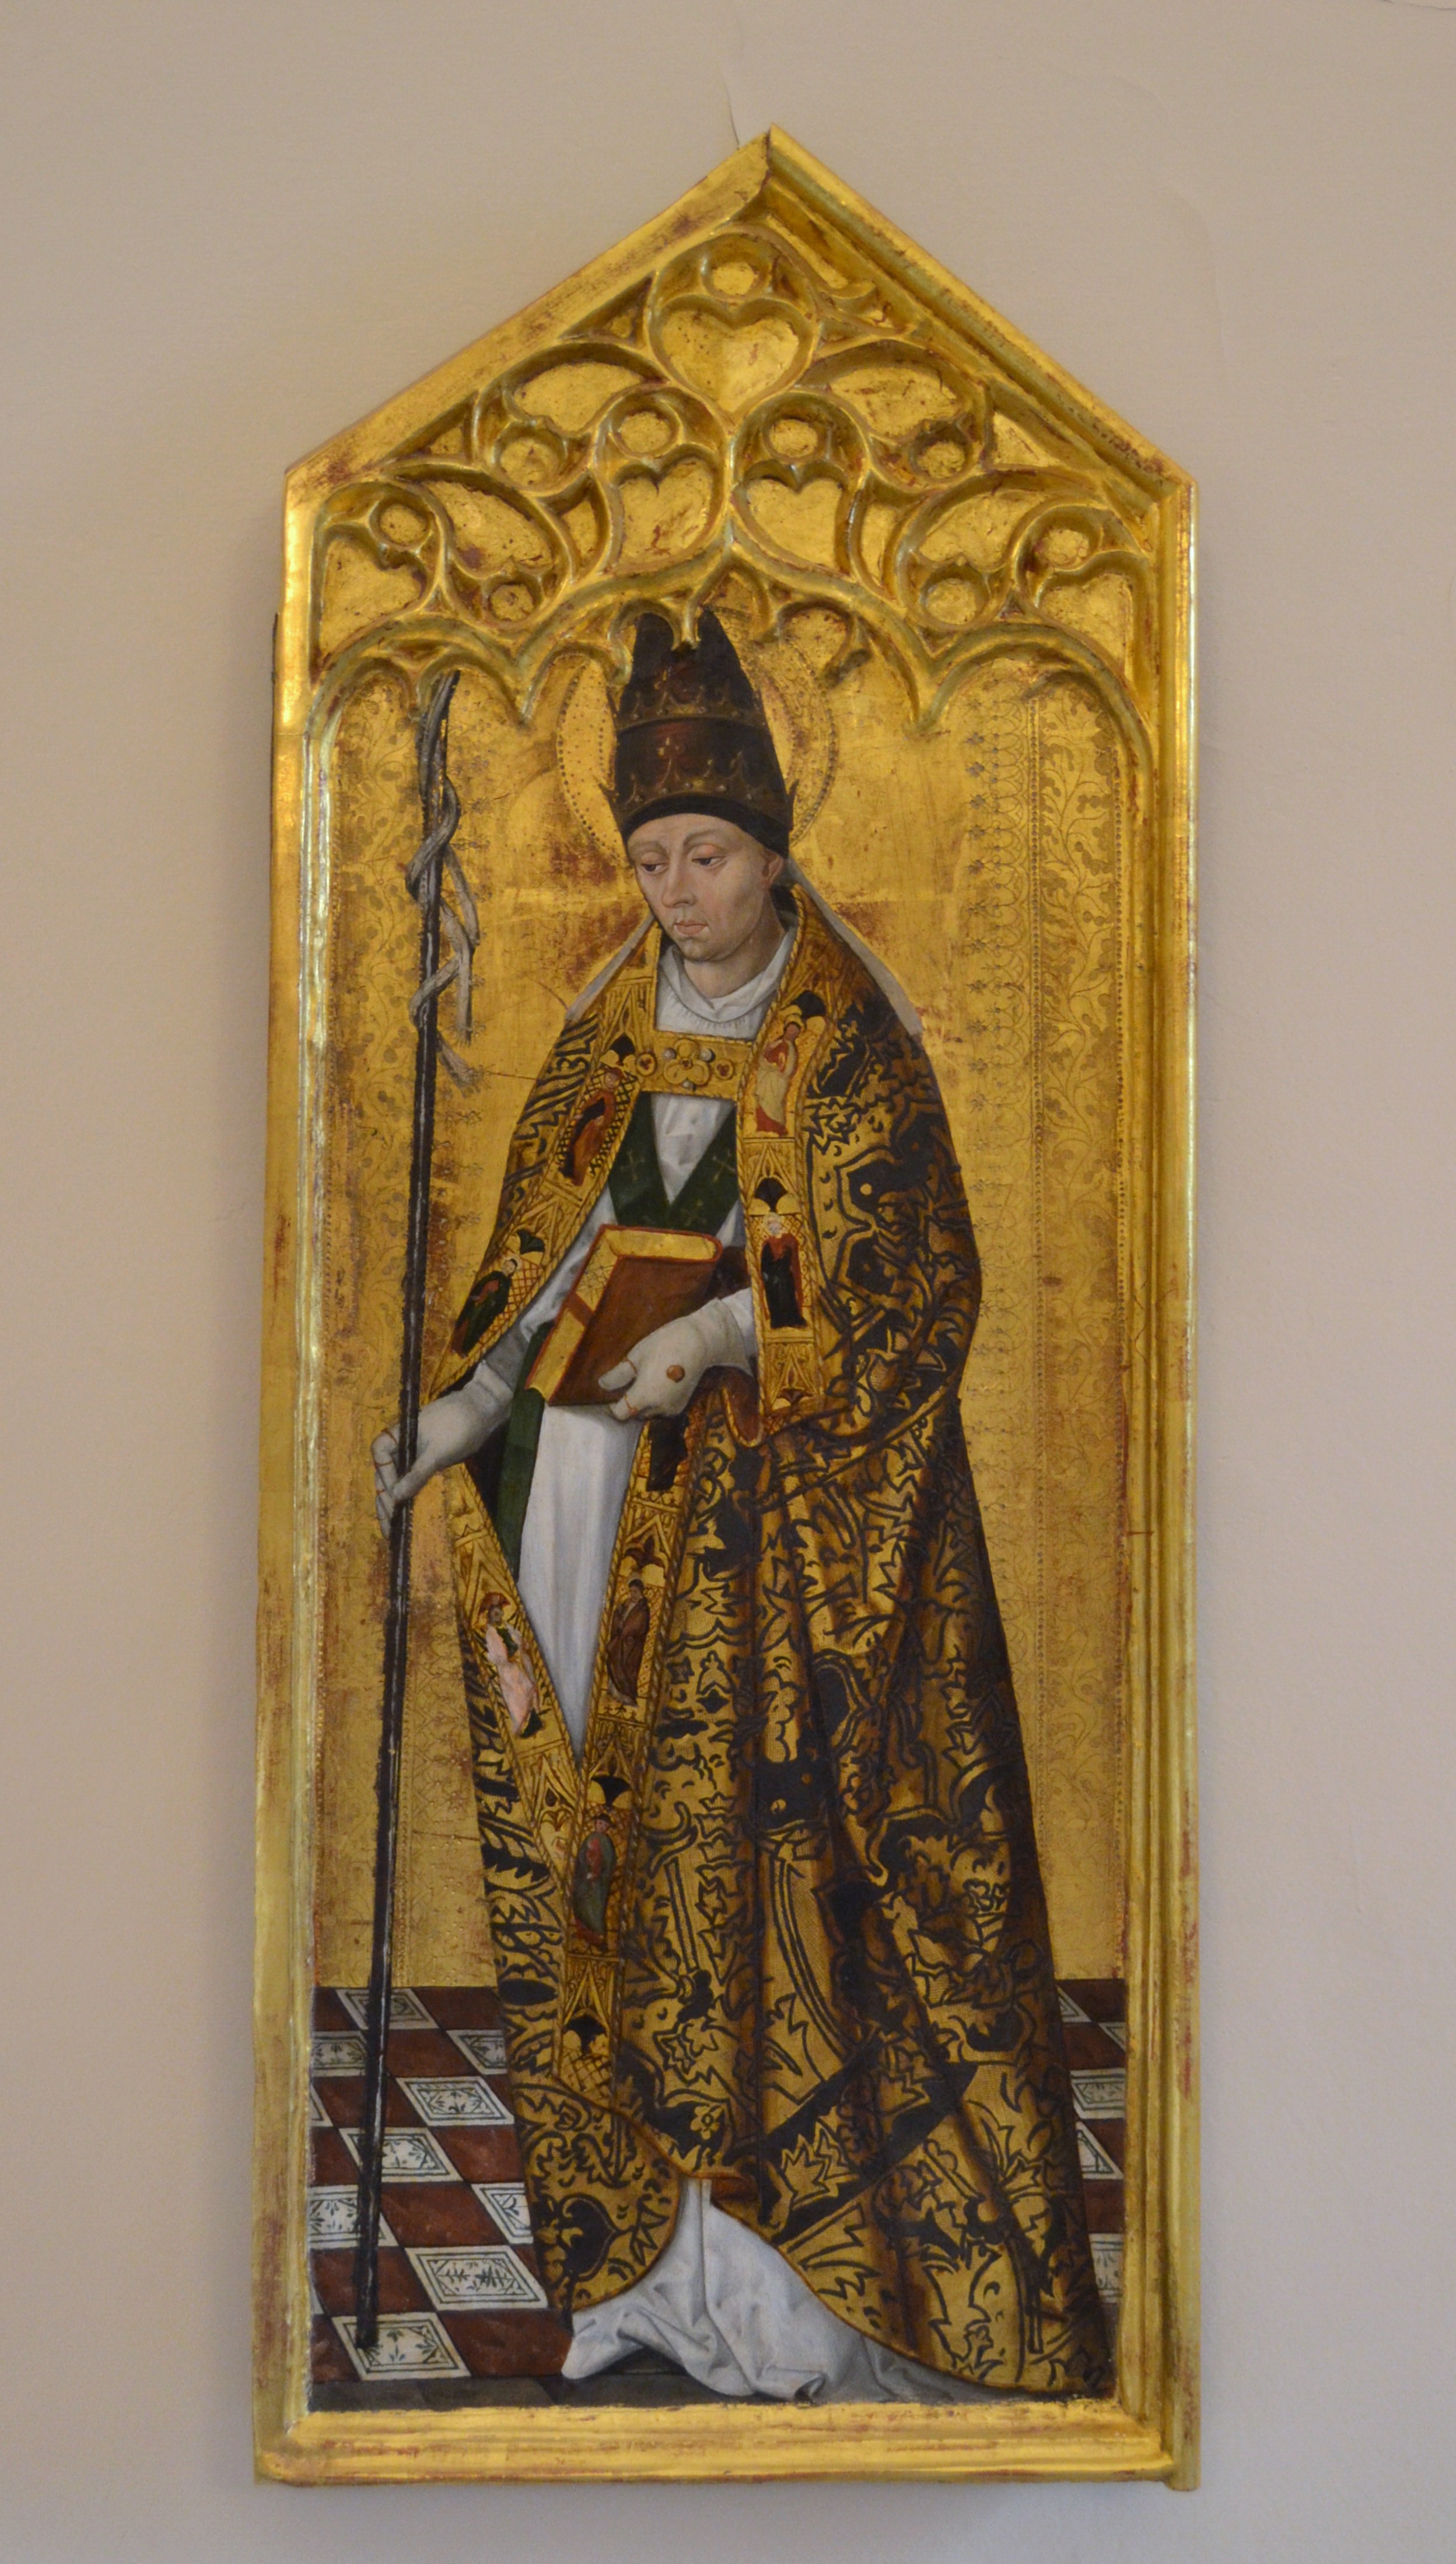  A sixteenth-century panel painting of Pope Saint Gregory the Great in the papal tiara and a pluvial cope. Image via WikiCommons. 